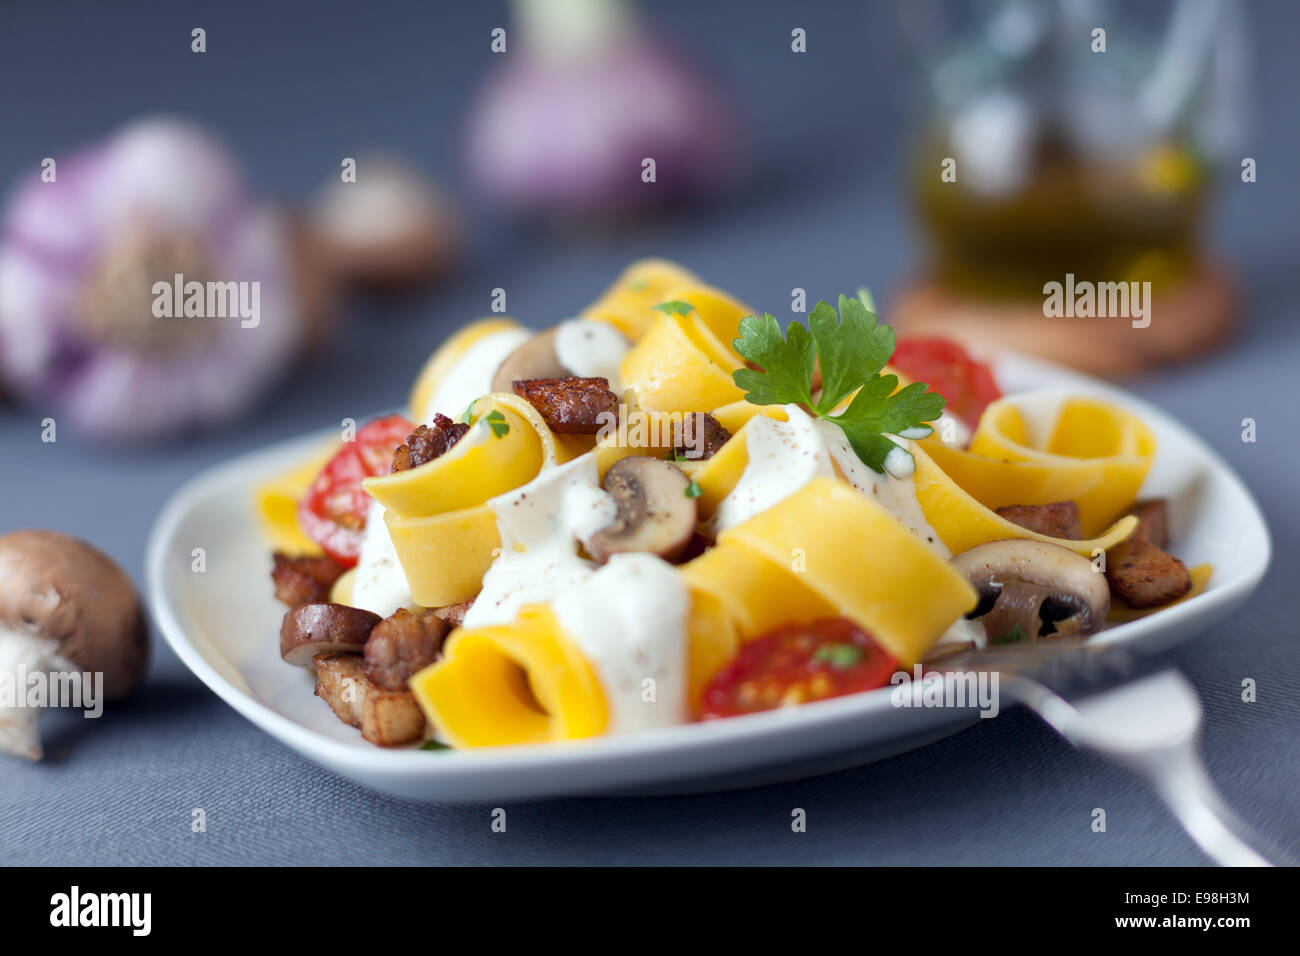 Delicious Italian cuisine of pappardelle noodles or pasta cooked with mushrooms and tomatoes and drizzled with a seasoned cream Stock Photo